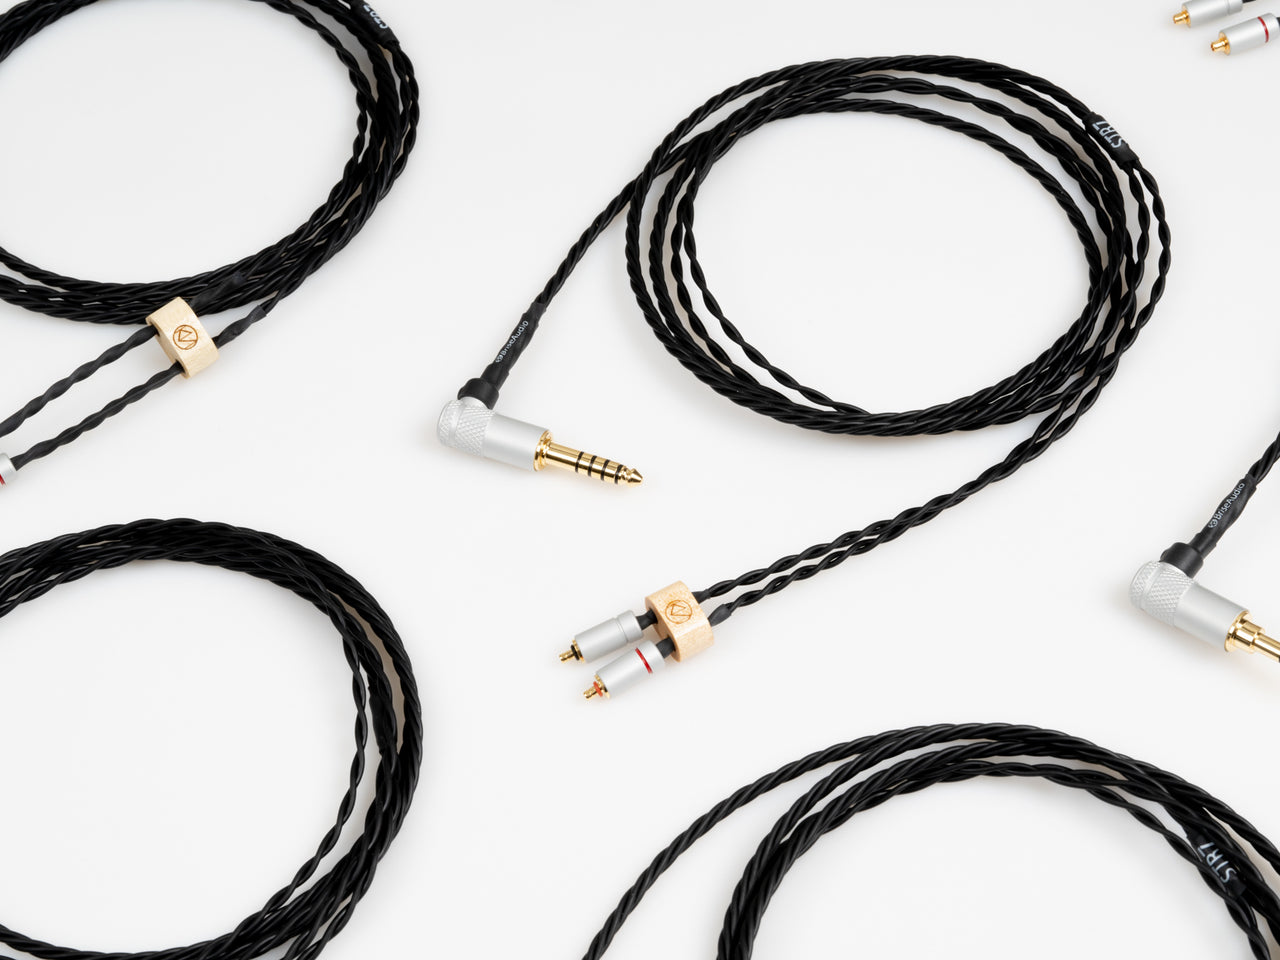 BriseAudio will release all 20 types of STR7 As-Is earphone re-cables on September 24, 2021.